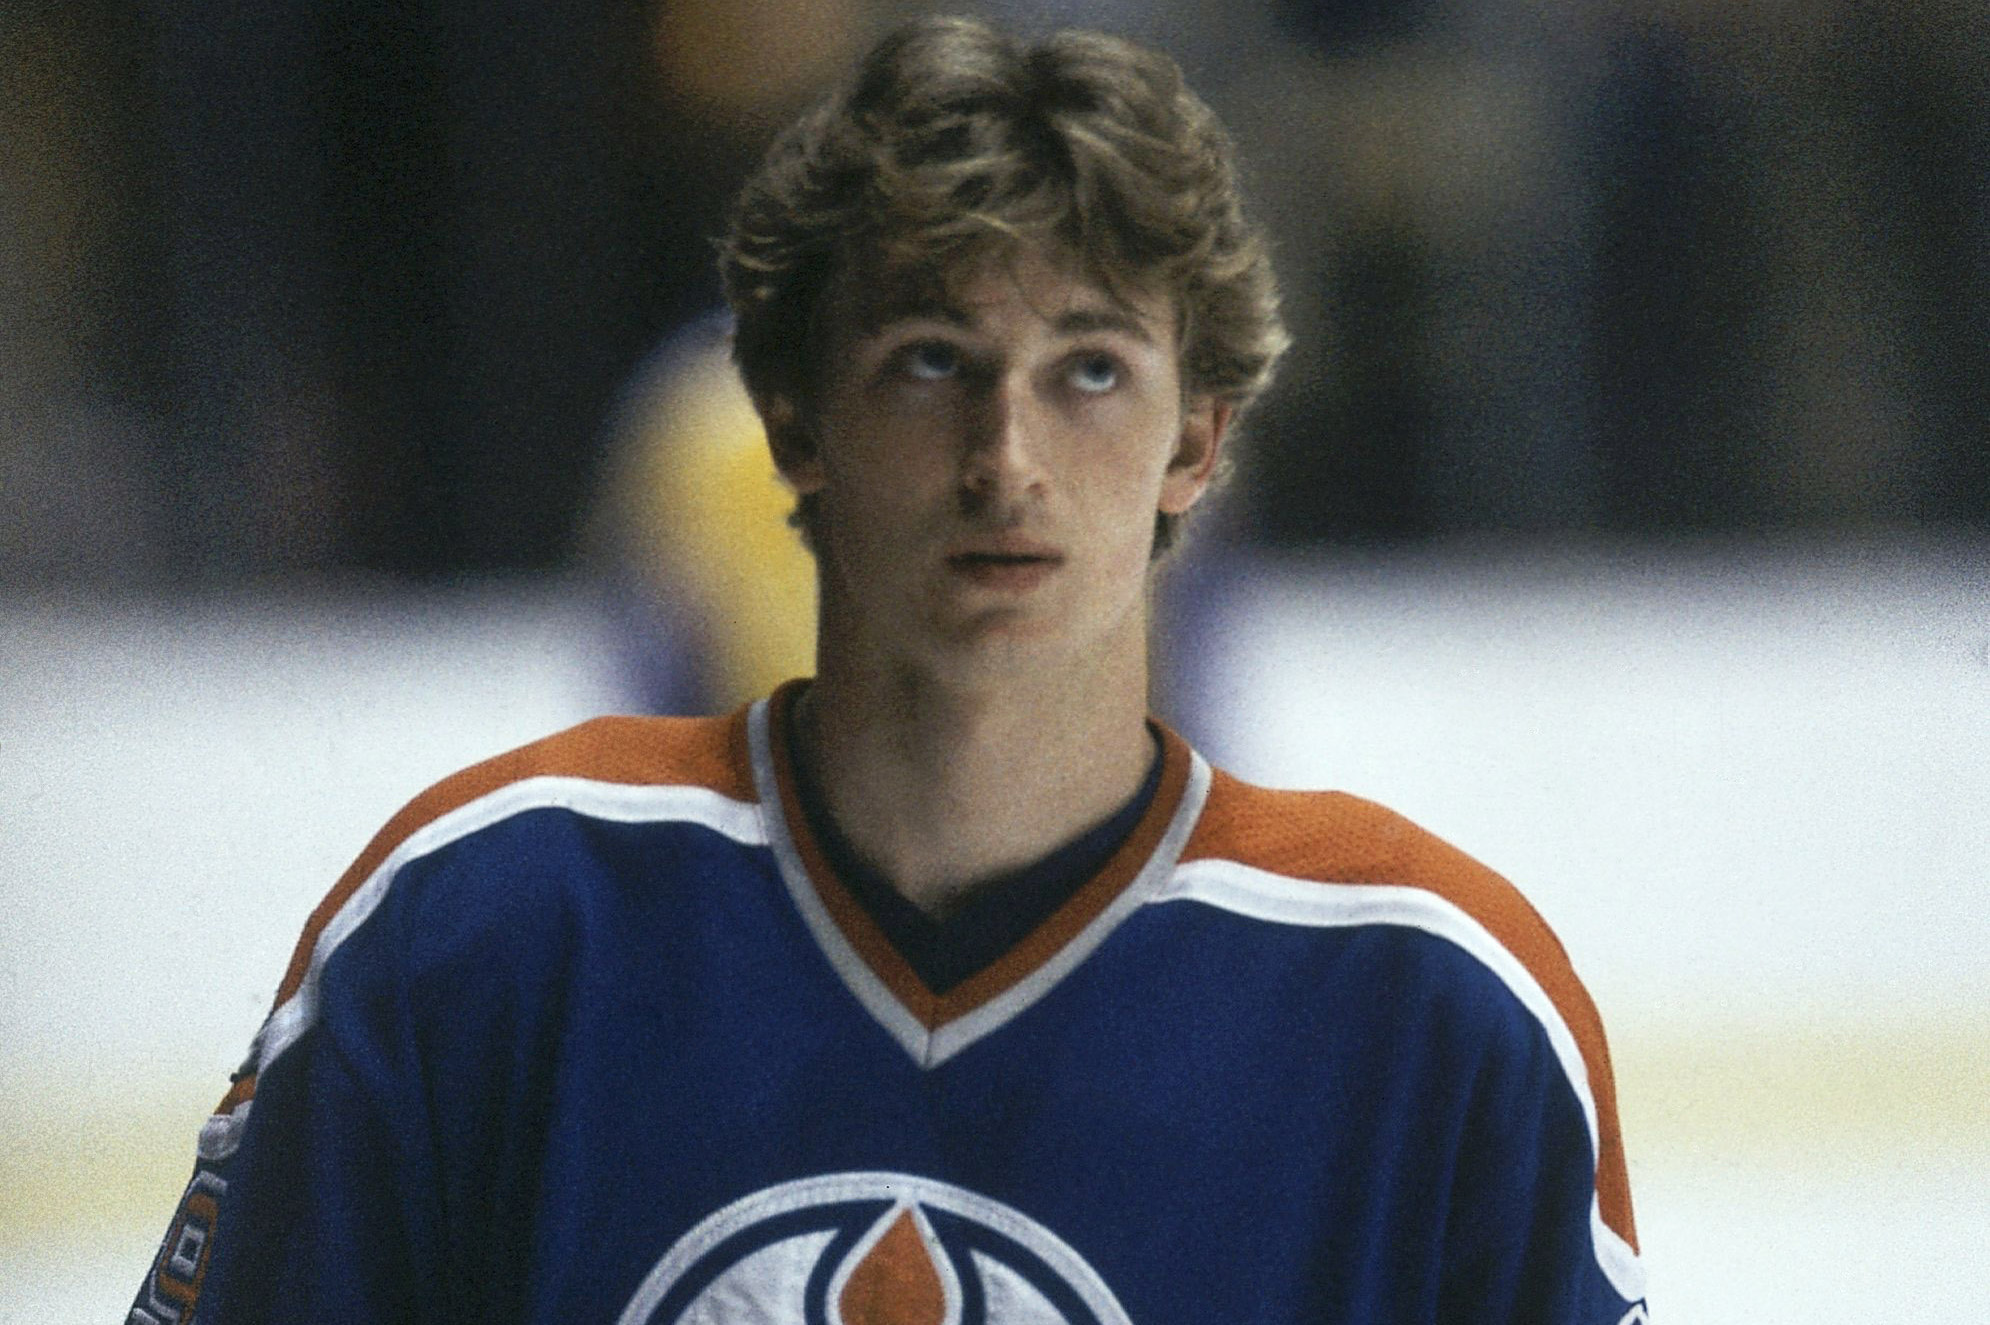 Wayne Gretzky 1986 Playoff Jersey Sells for $206,021